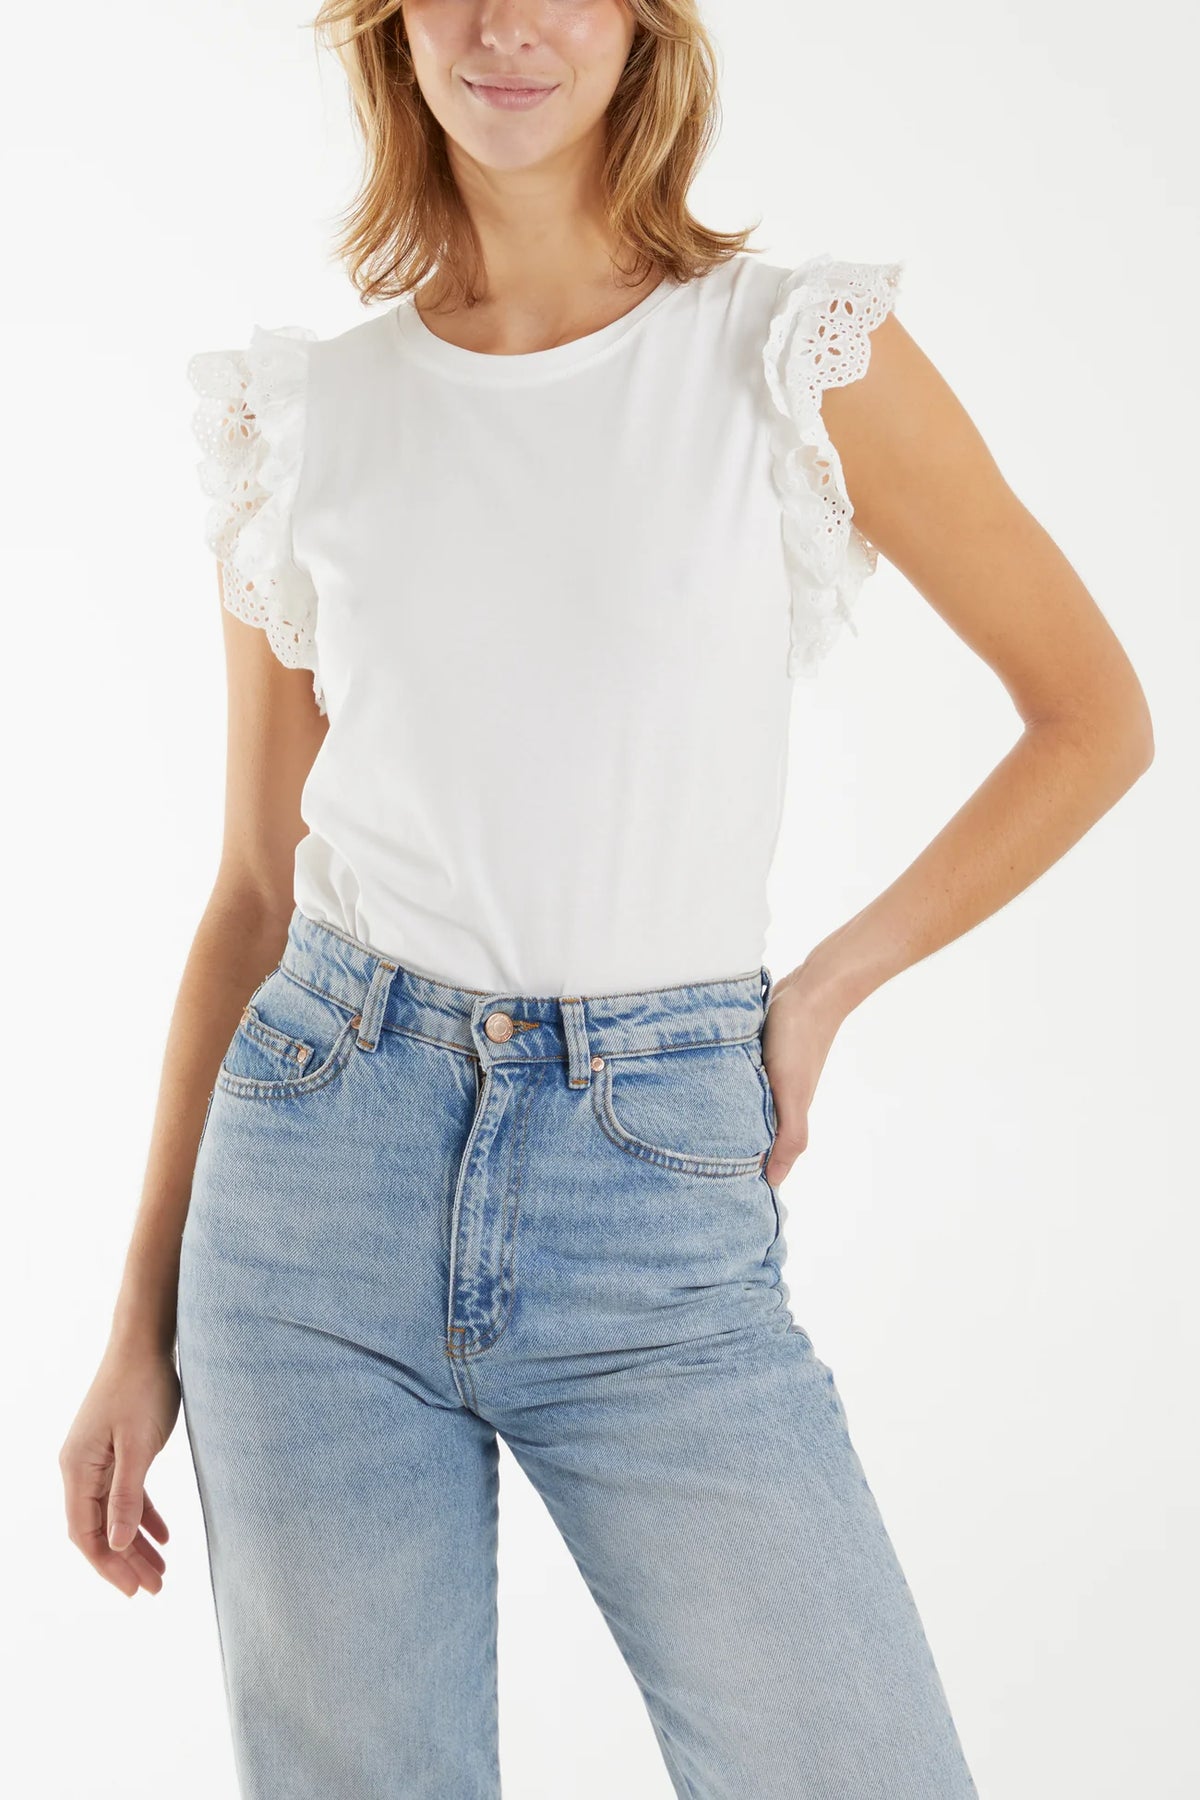 qed-london-ruffle-broderie-white-top